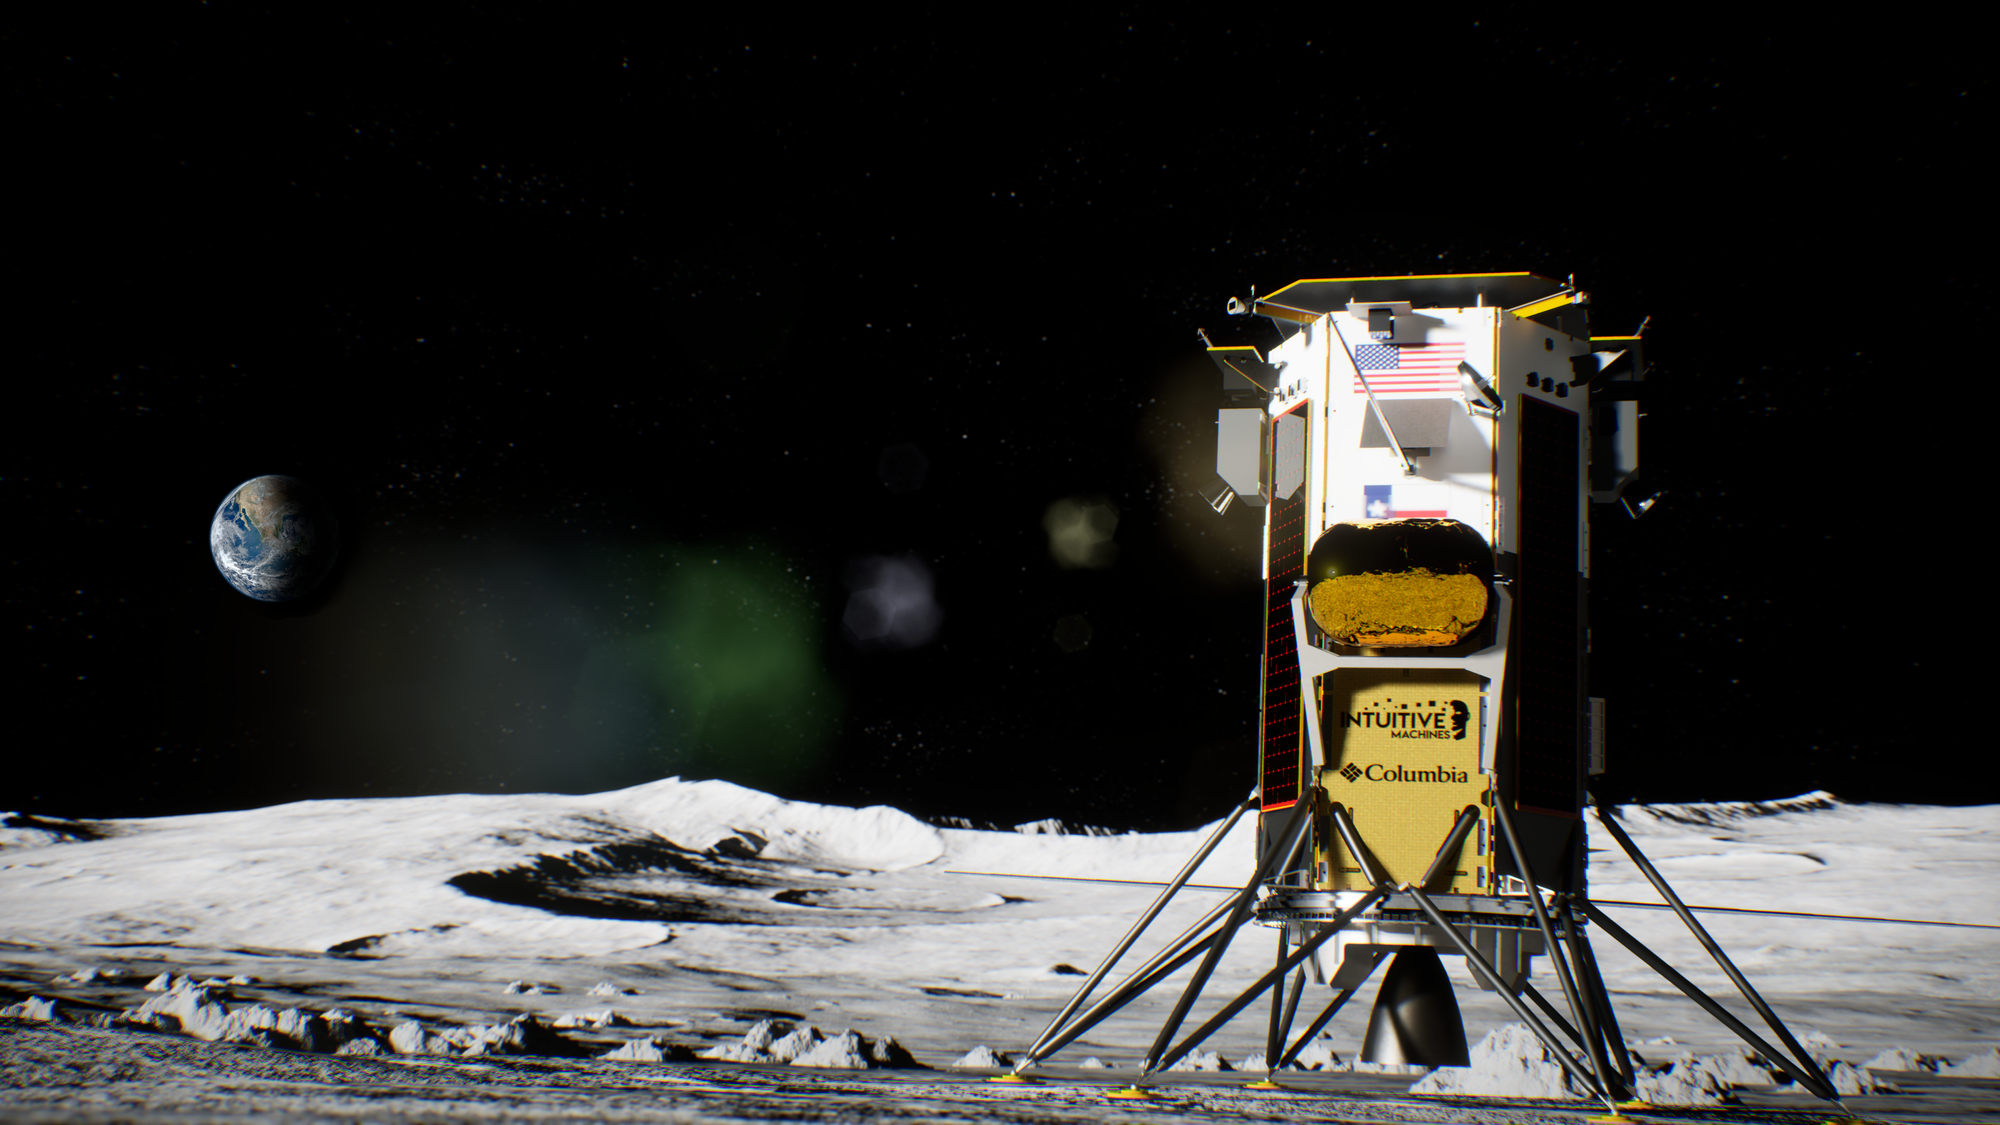 A render of the Nova-C IM-1 lander upright on the lunar surface. ©Intuitive Machines